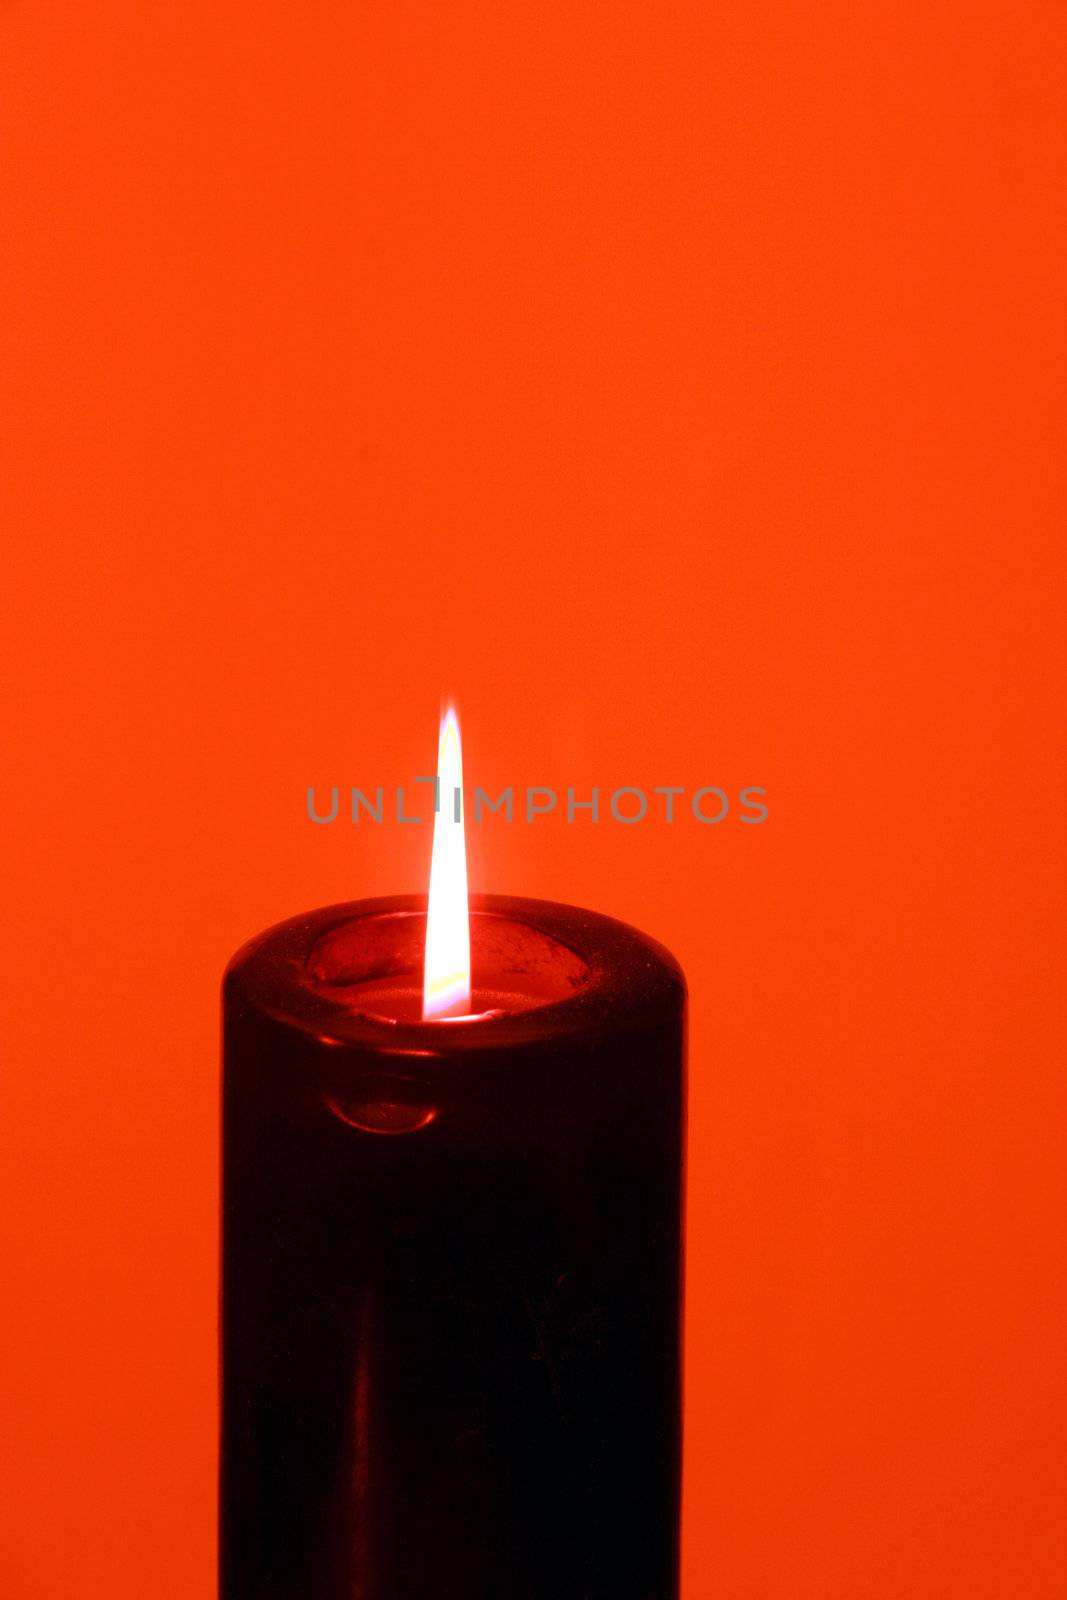 Red candle light by Imagecom